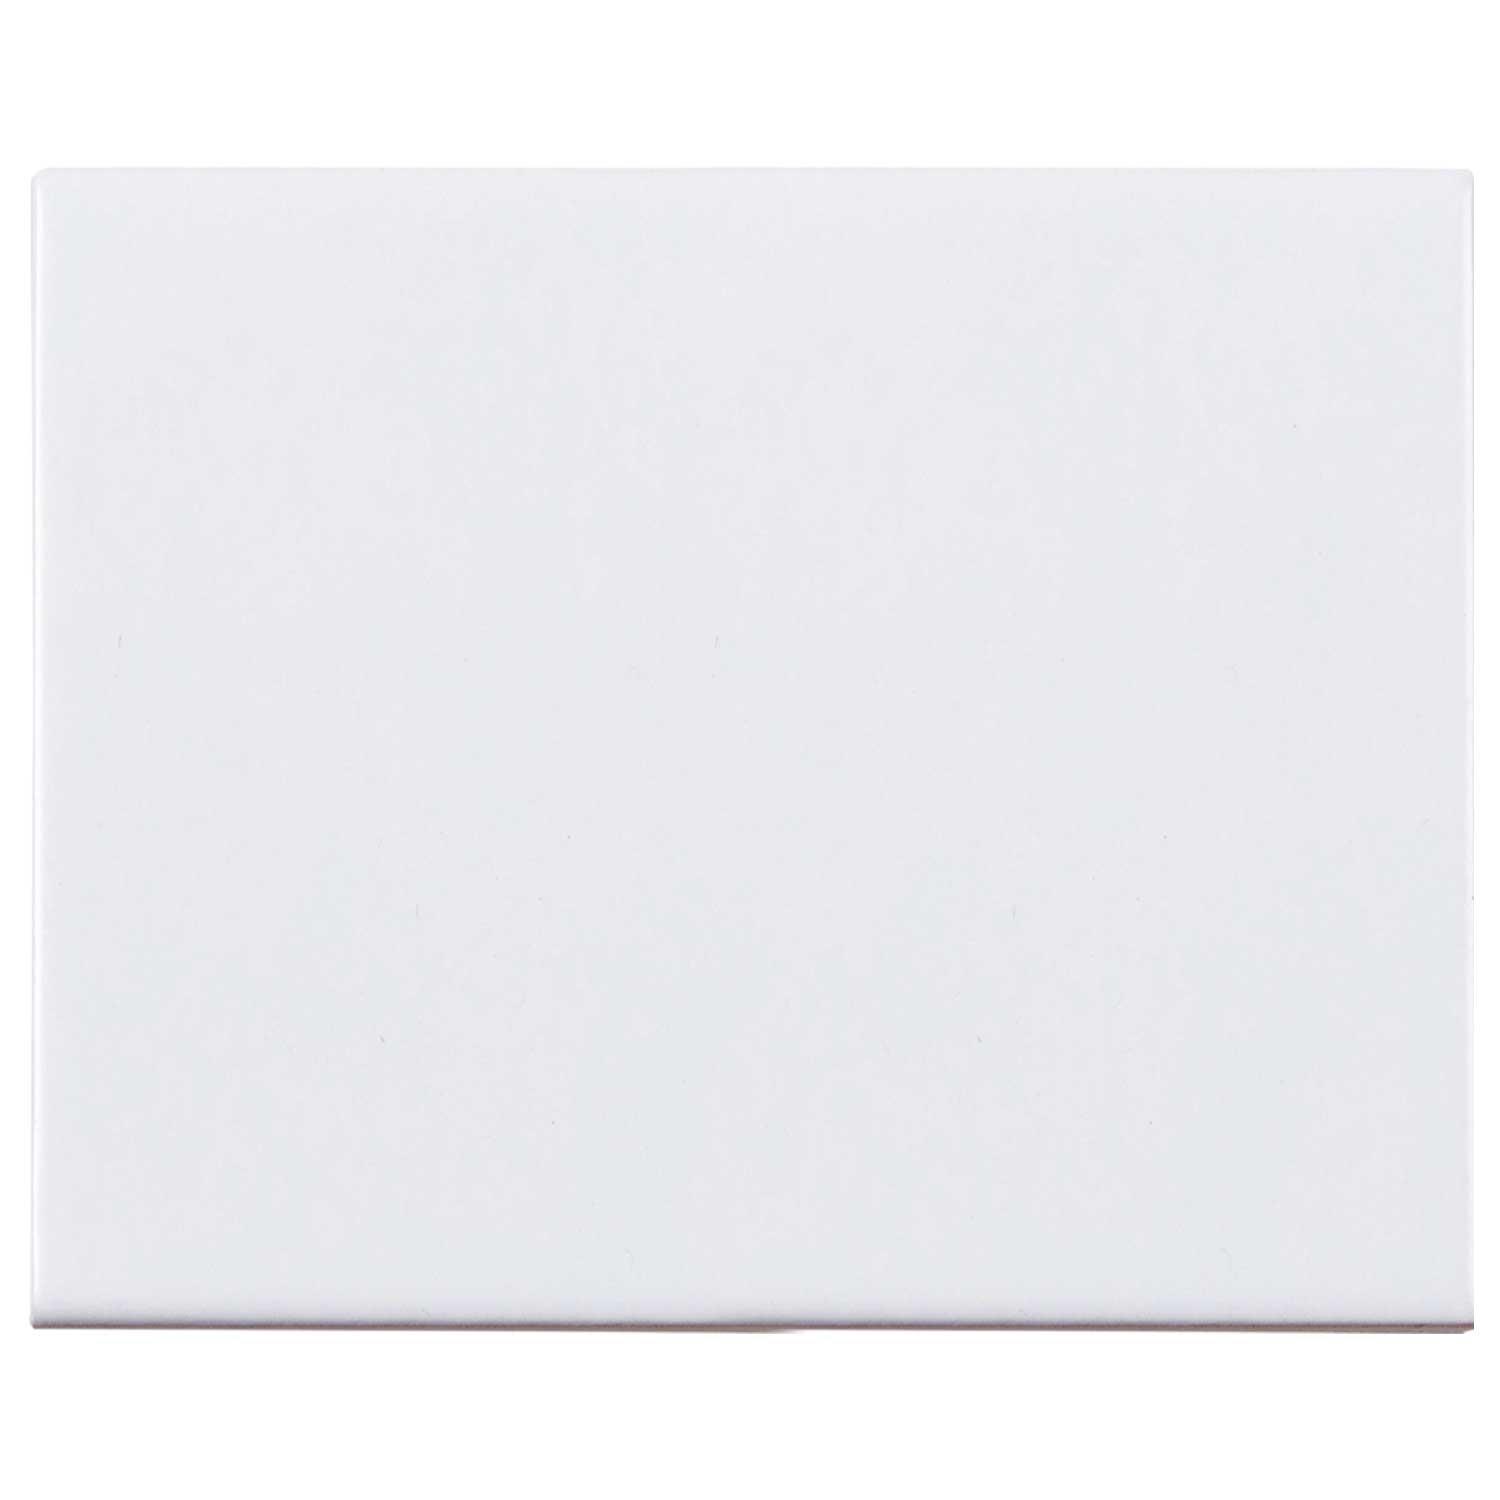 Classic Gloss White Ceramic Wall Tile Subway Style 200x250mm